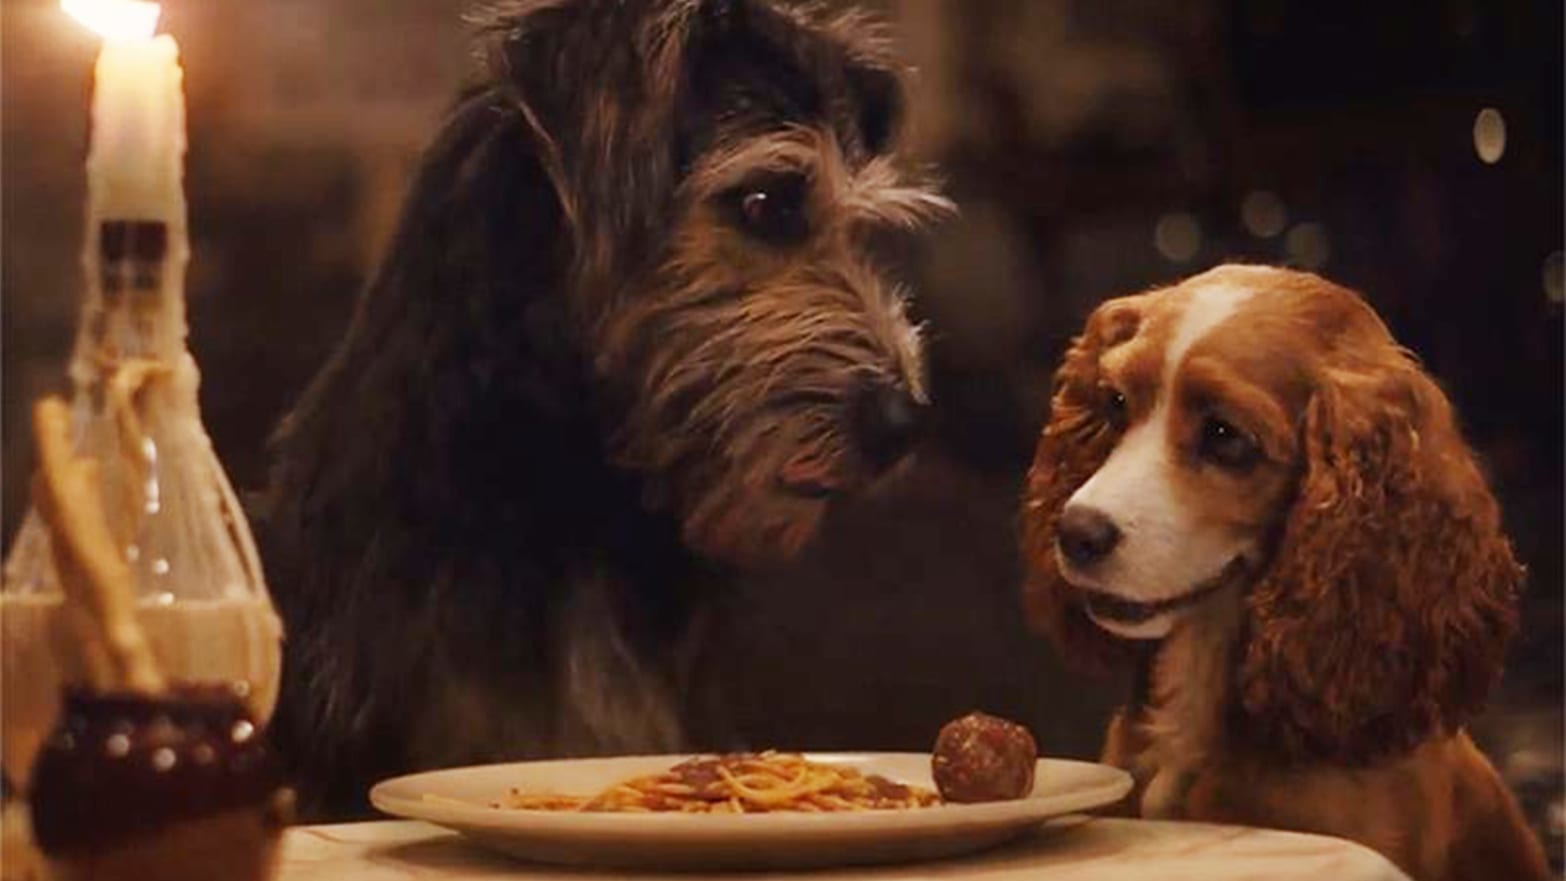 Disney Plus' New 'Lady and the Tramp' Remake Is as Weird as It Is Adorable